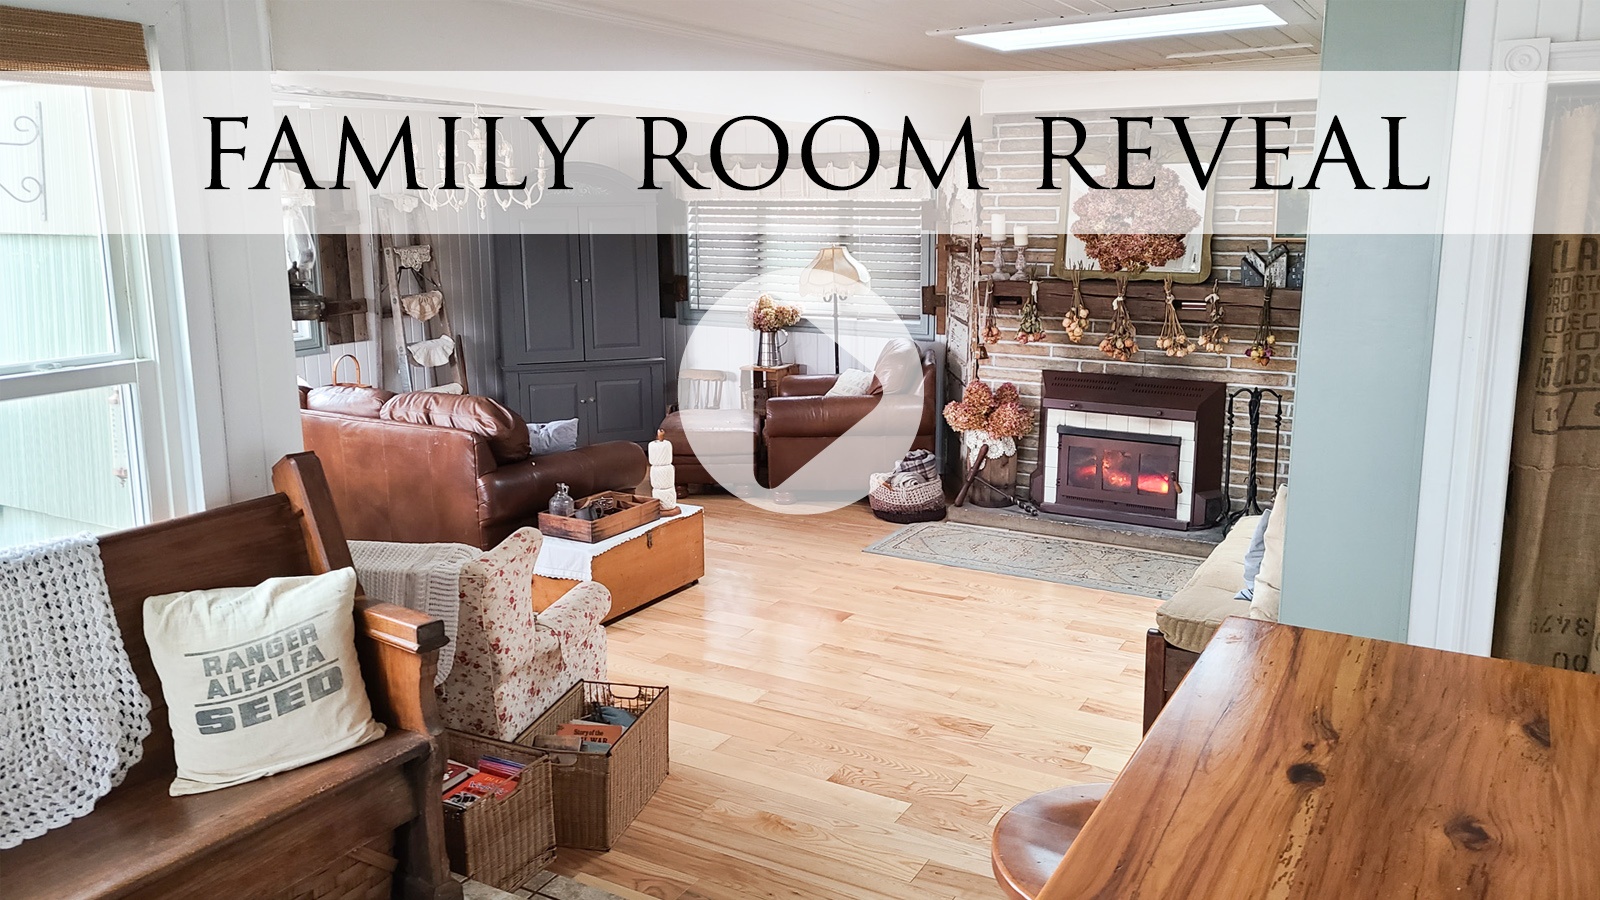 Prodigal Pieces Family Room Remodel Reveal Video | prodigalpieces.com #prodigalpieces